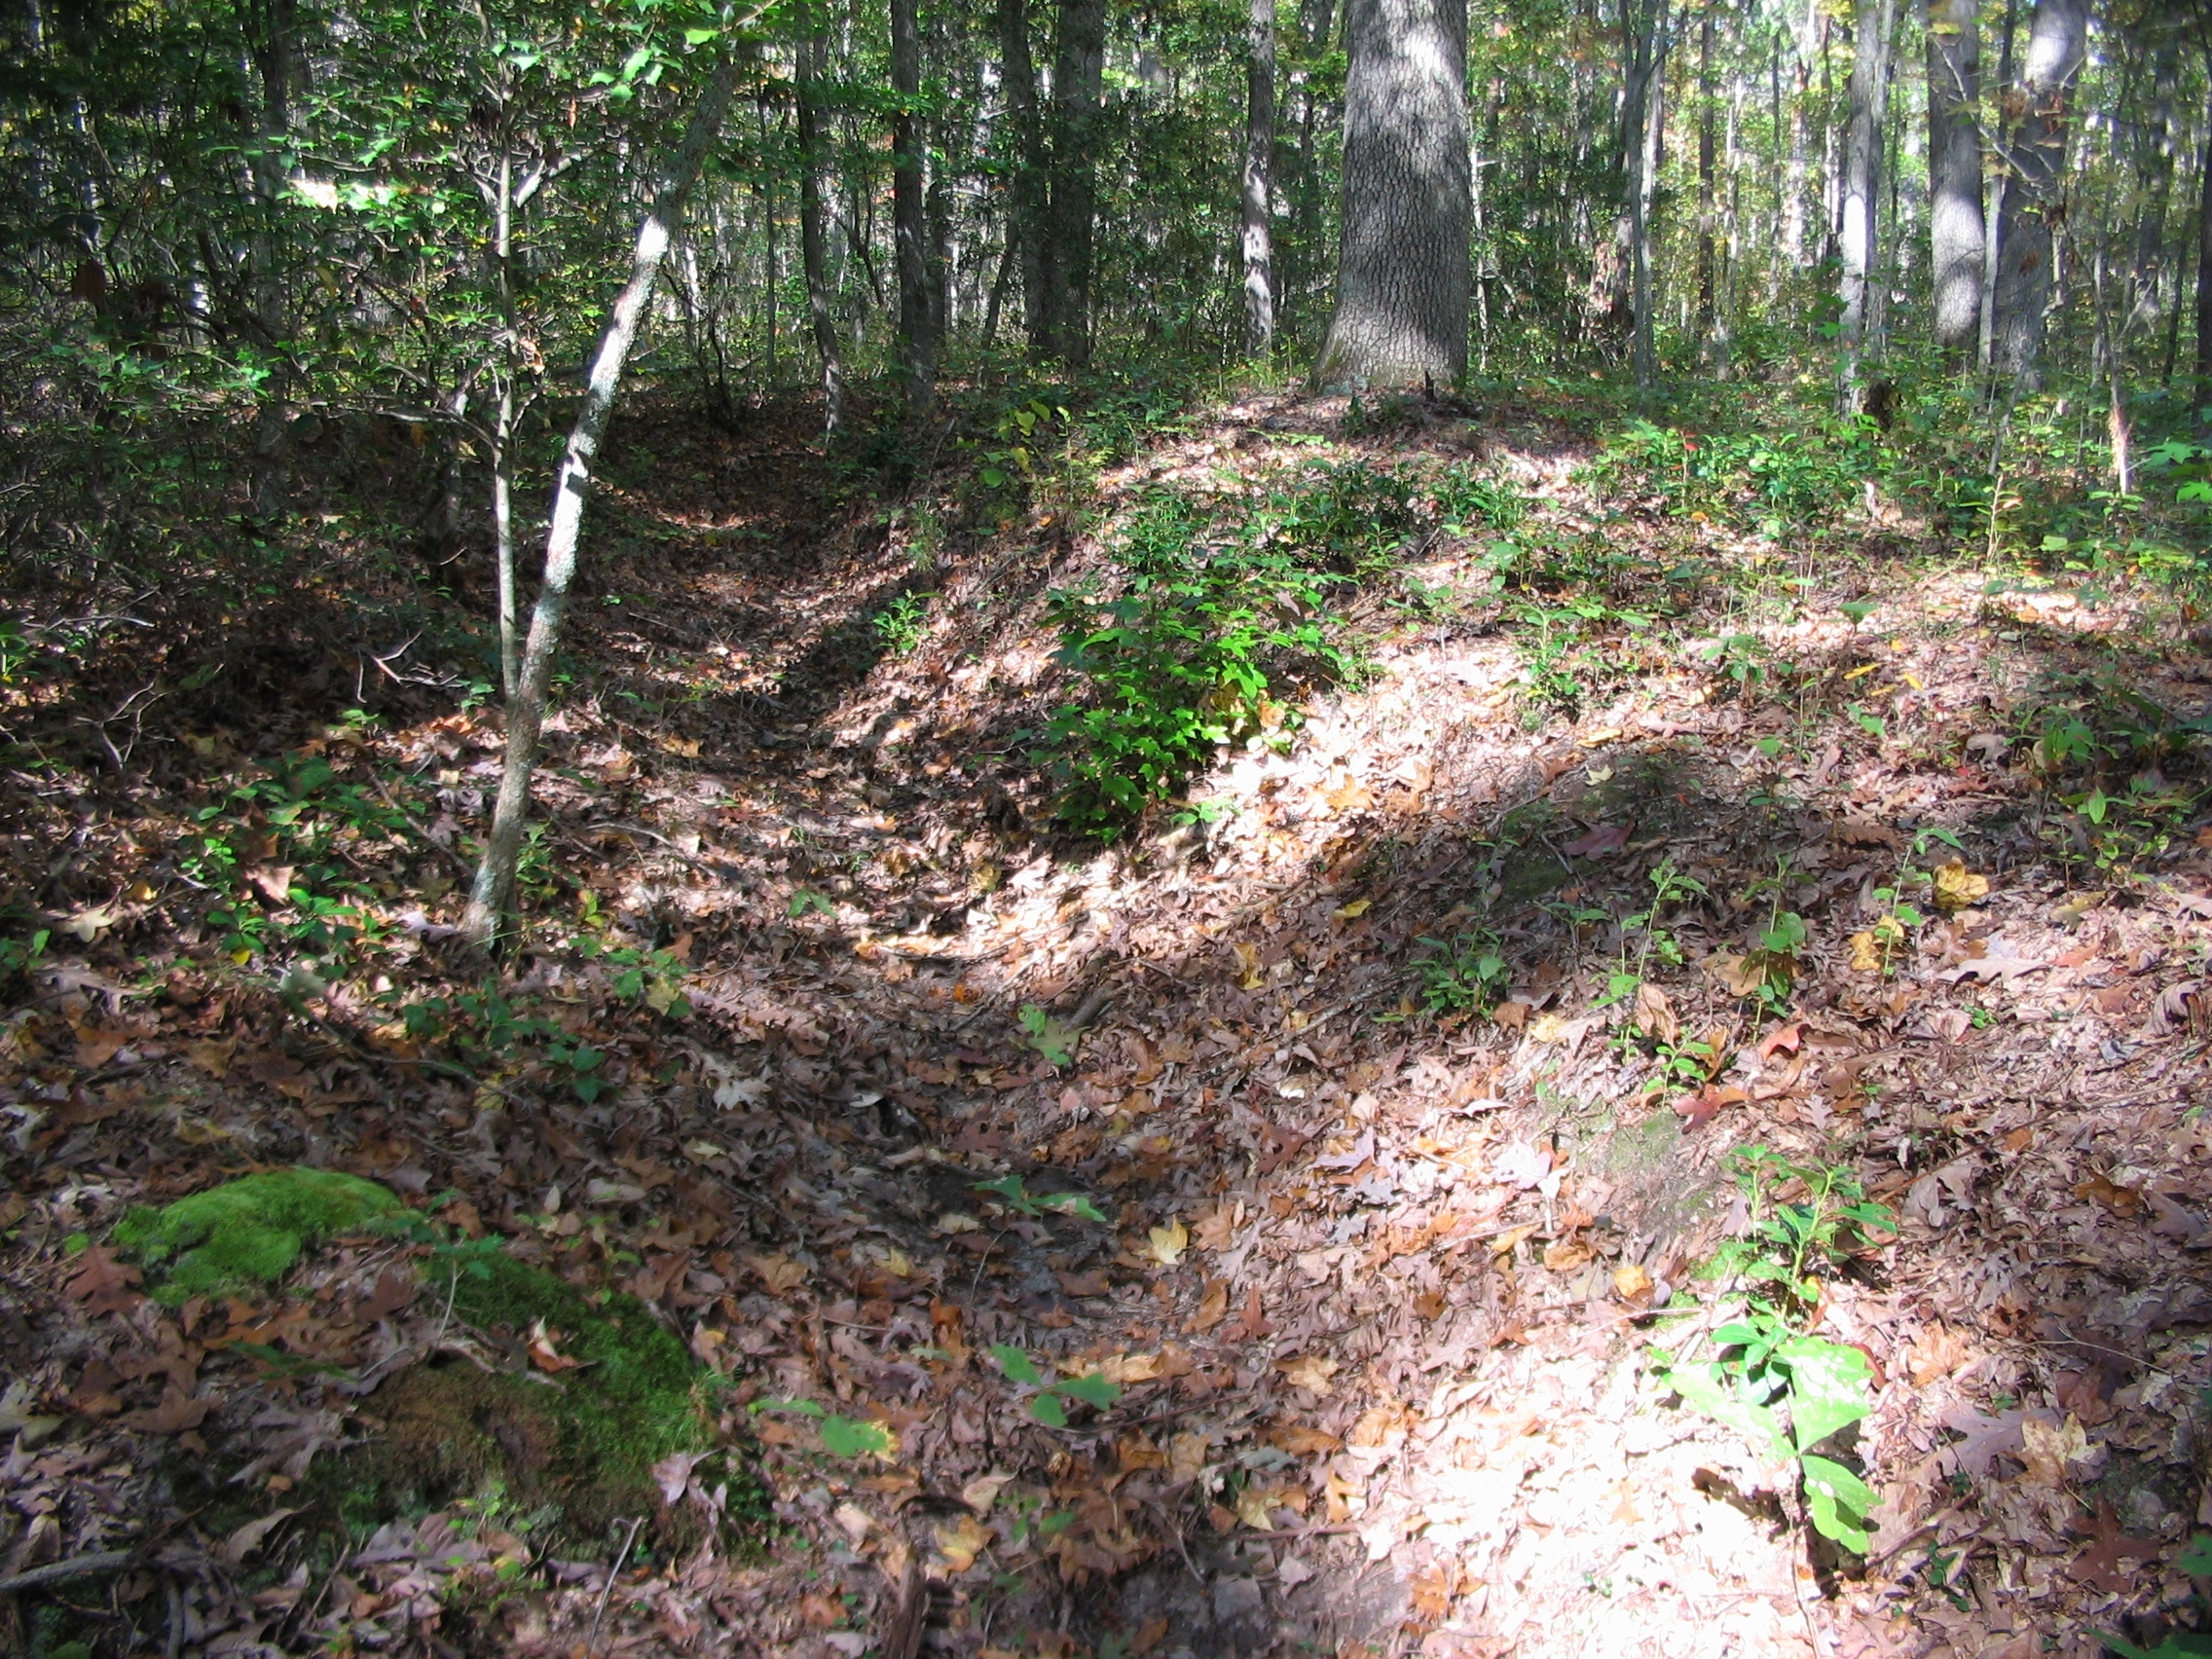 Section of Earthworks near the Marker